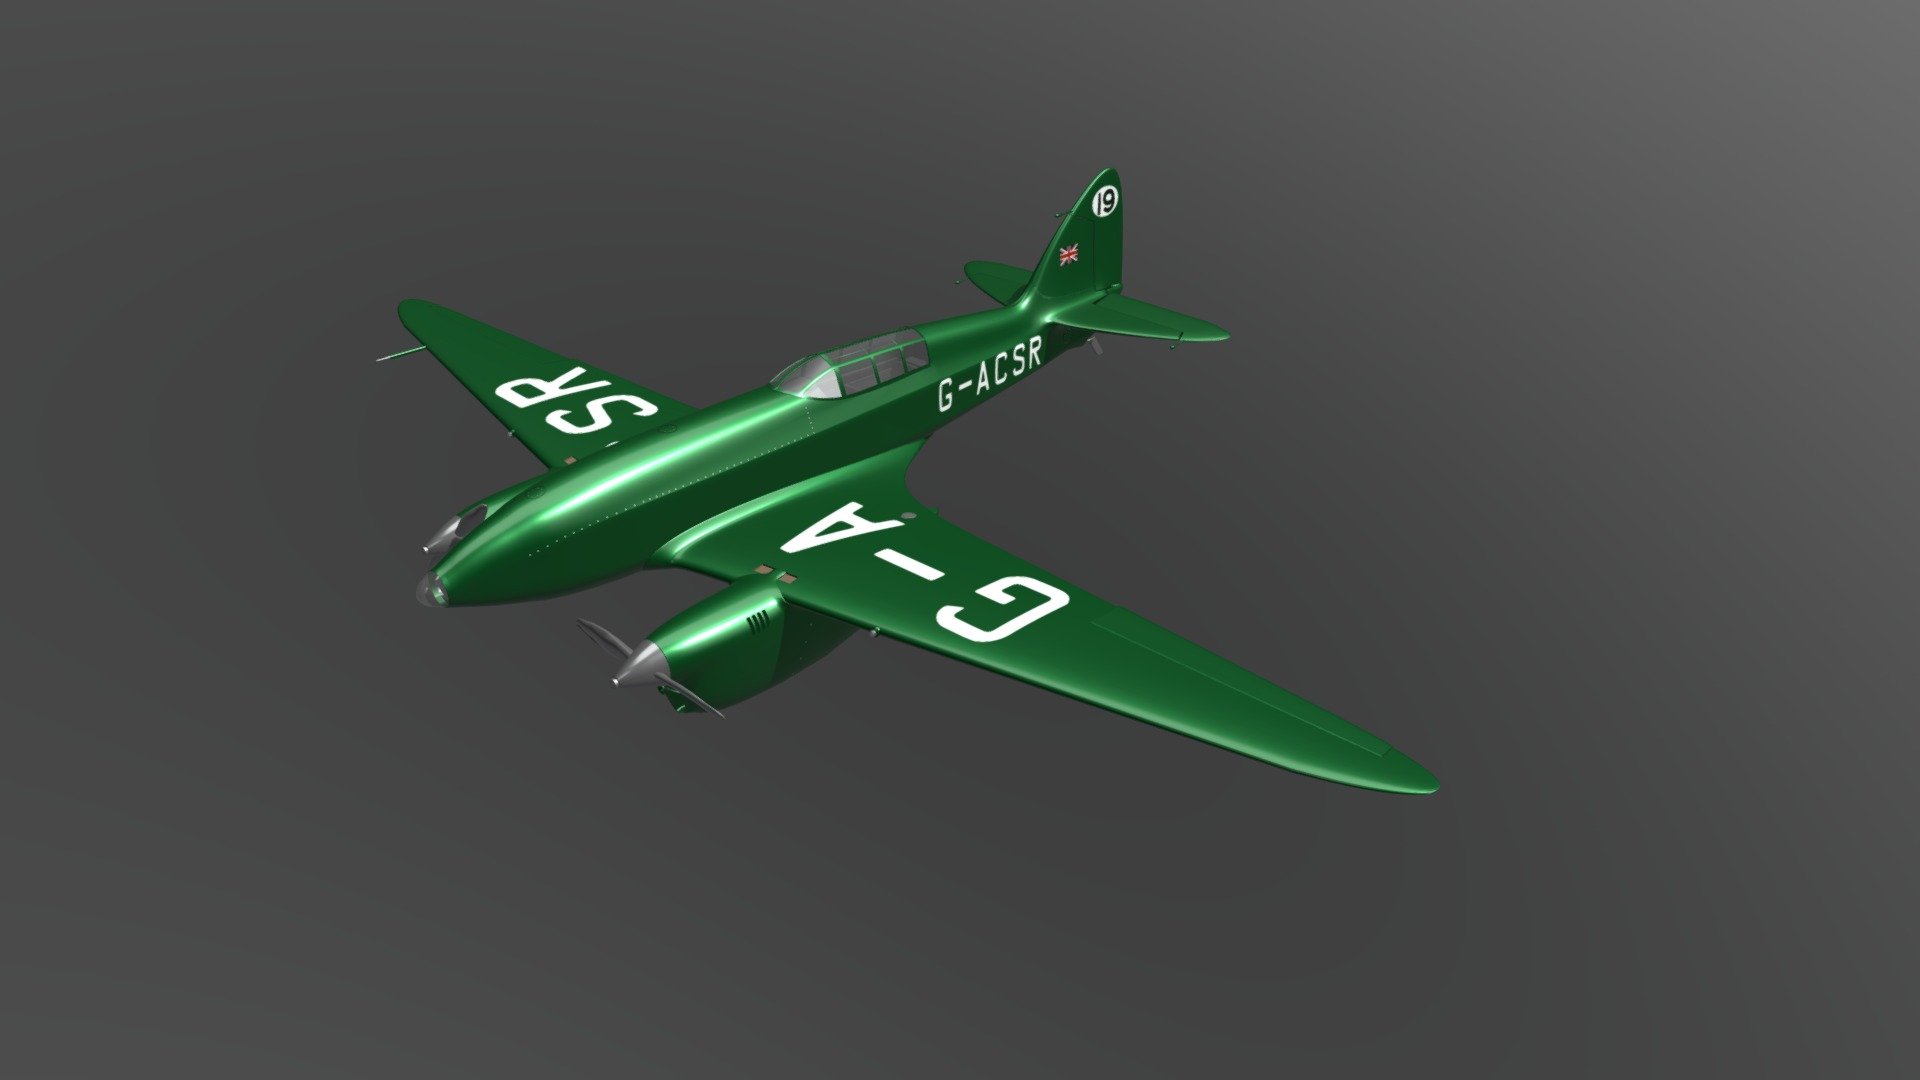 The de Havilland DH.88 Comet was a two-seat, twin-engined aircraft developed specifically to participate in the 1934 England-Australia MacRobertson Air Race from the United Kingdom to Australia 3d model